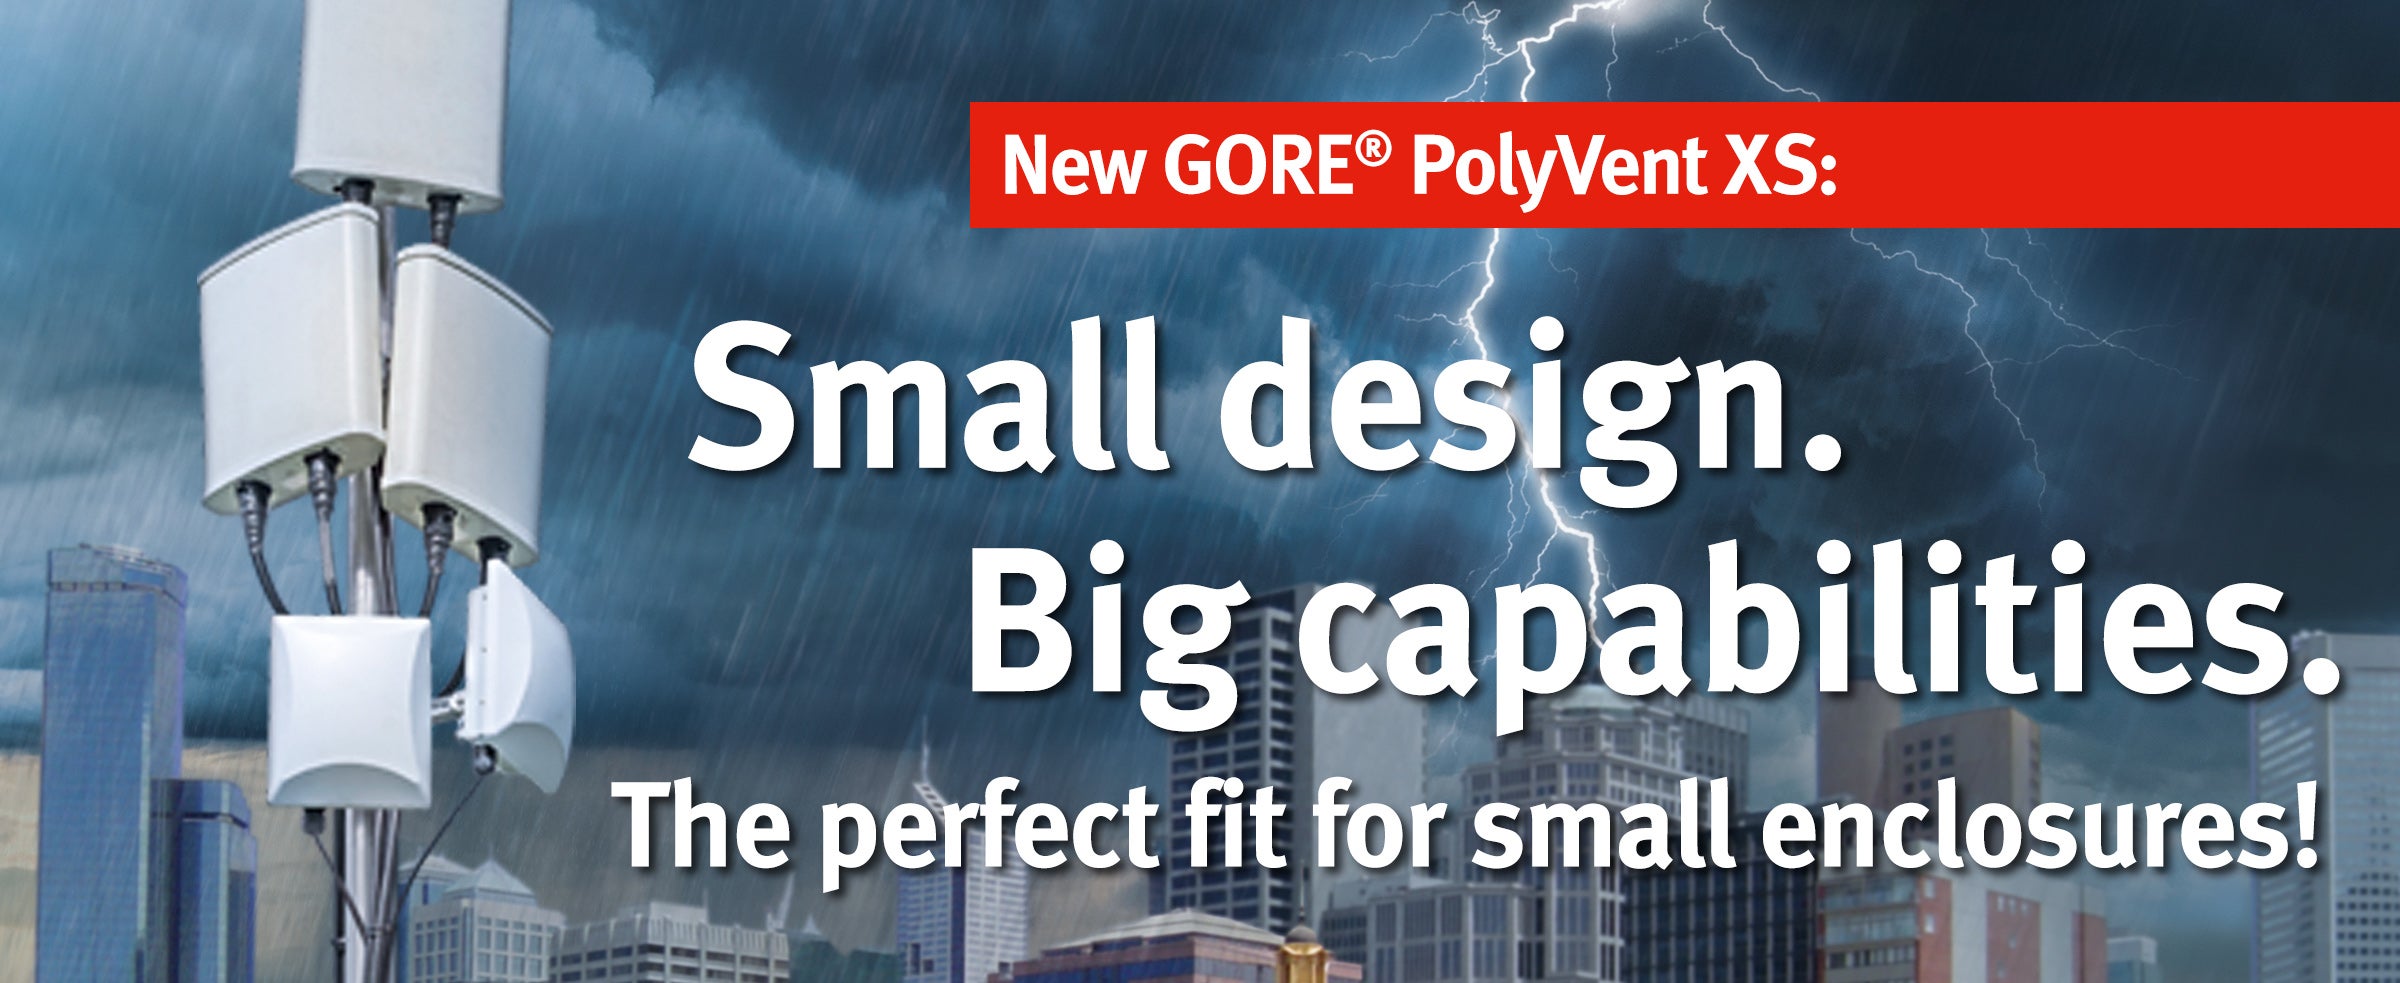 New GORE<sup>®</sup> PolyVent XS: The Compact, Low-Profile Vent with Big Capabilities.